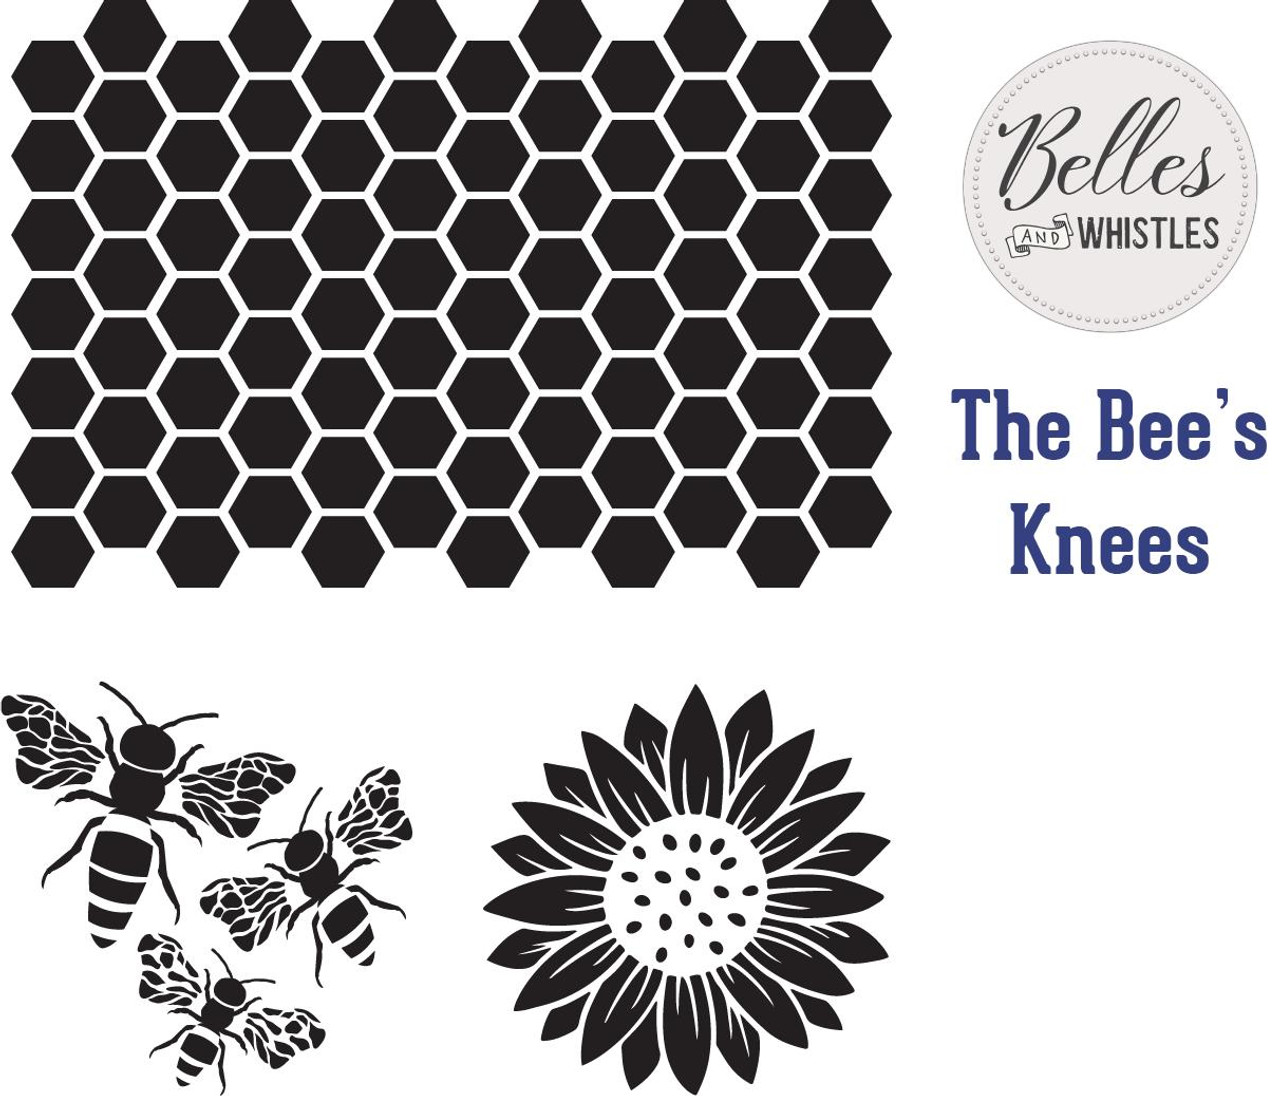 SCHABLON - Belles and Whistles Stencil - THE BEE'S KNEES